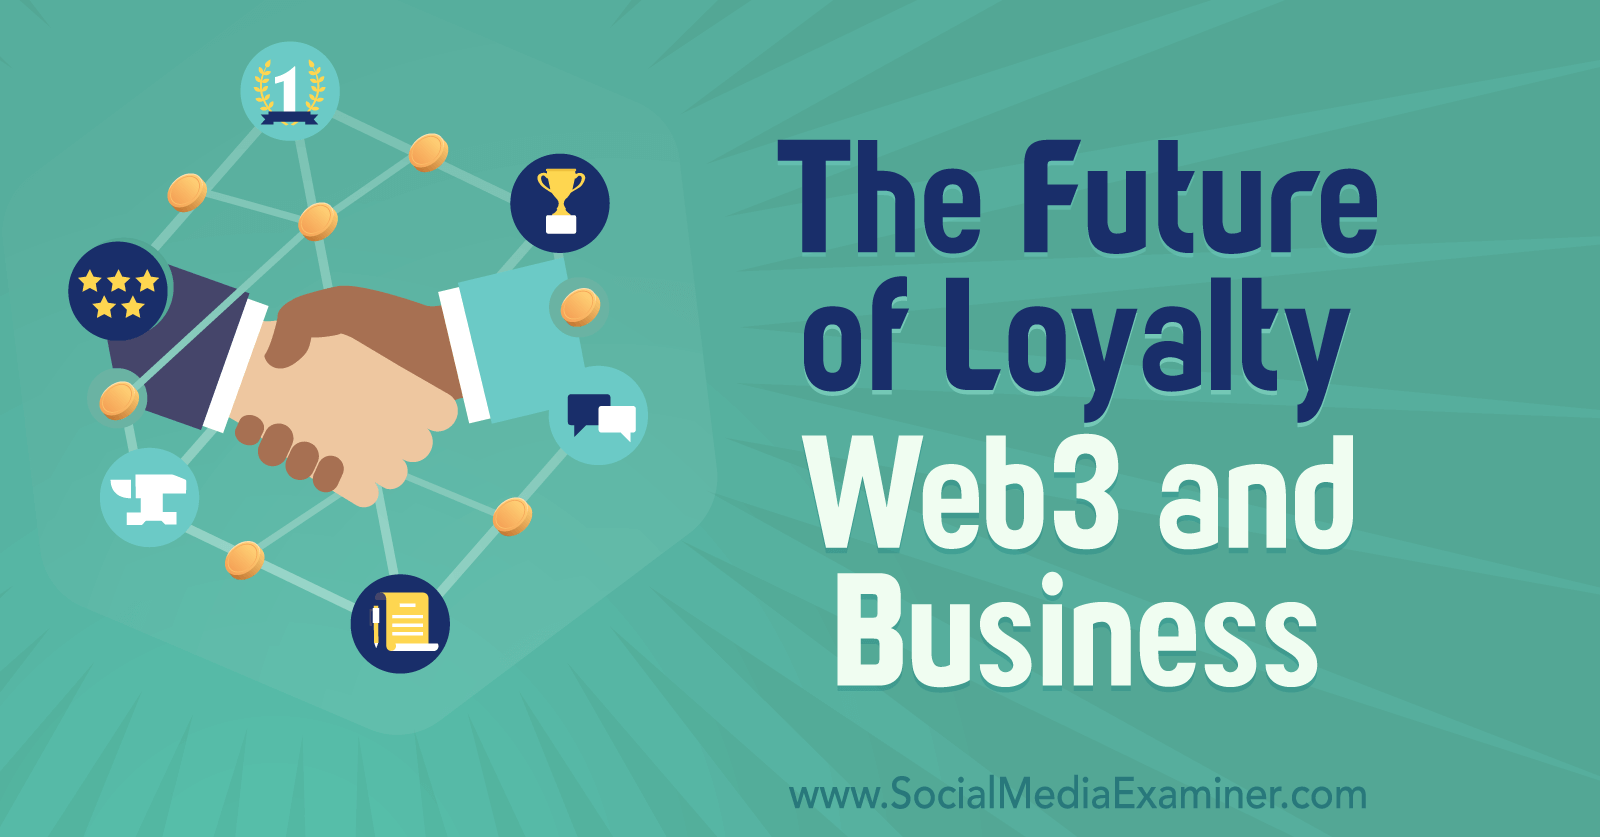 The Future of Loyalty: Web3 and Business by Social Media Examiner